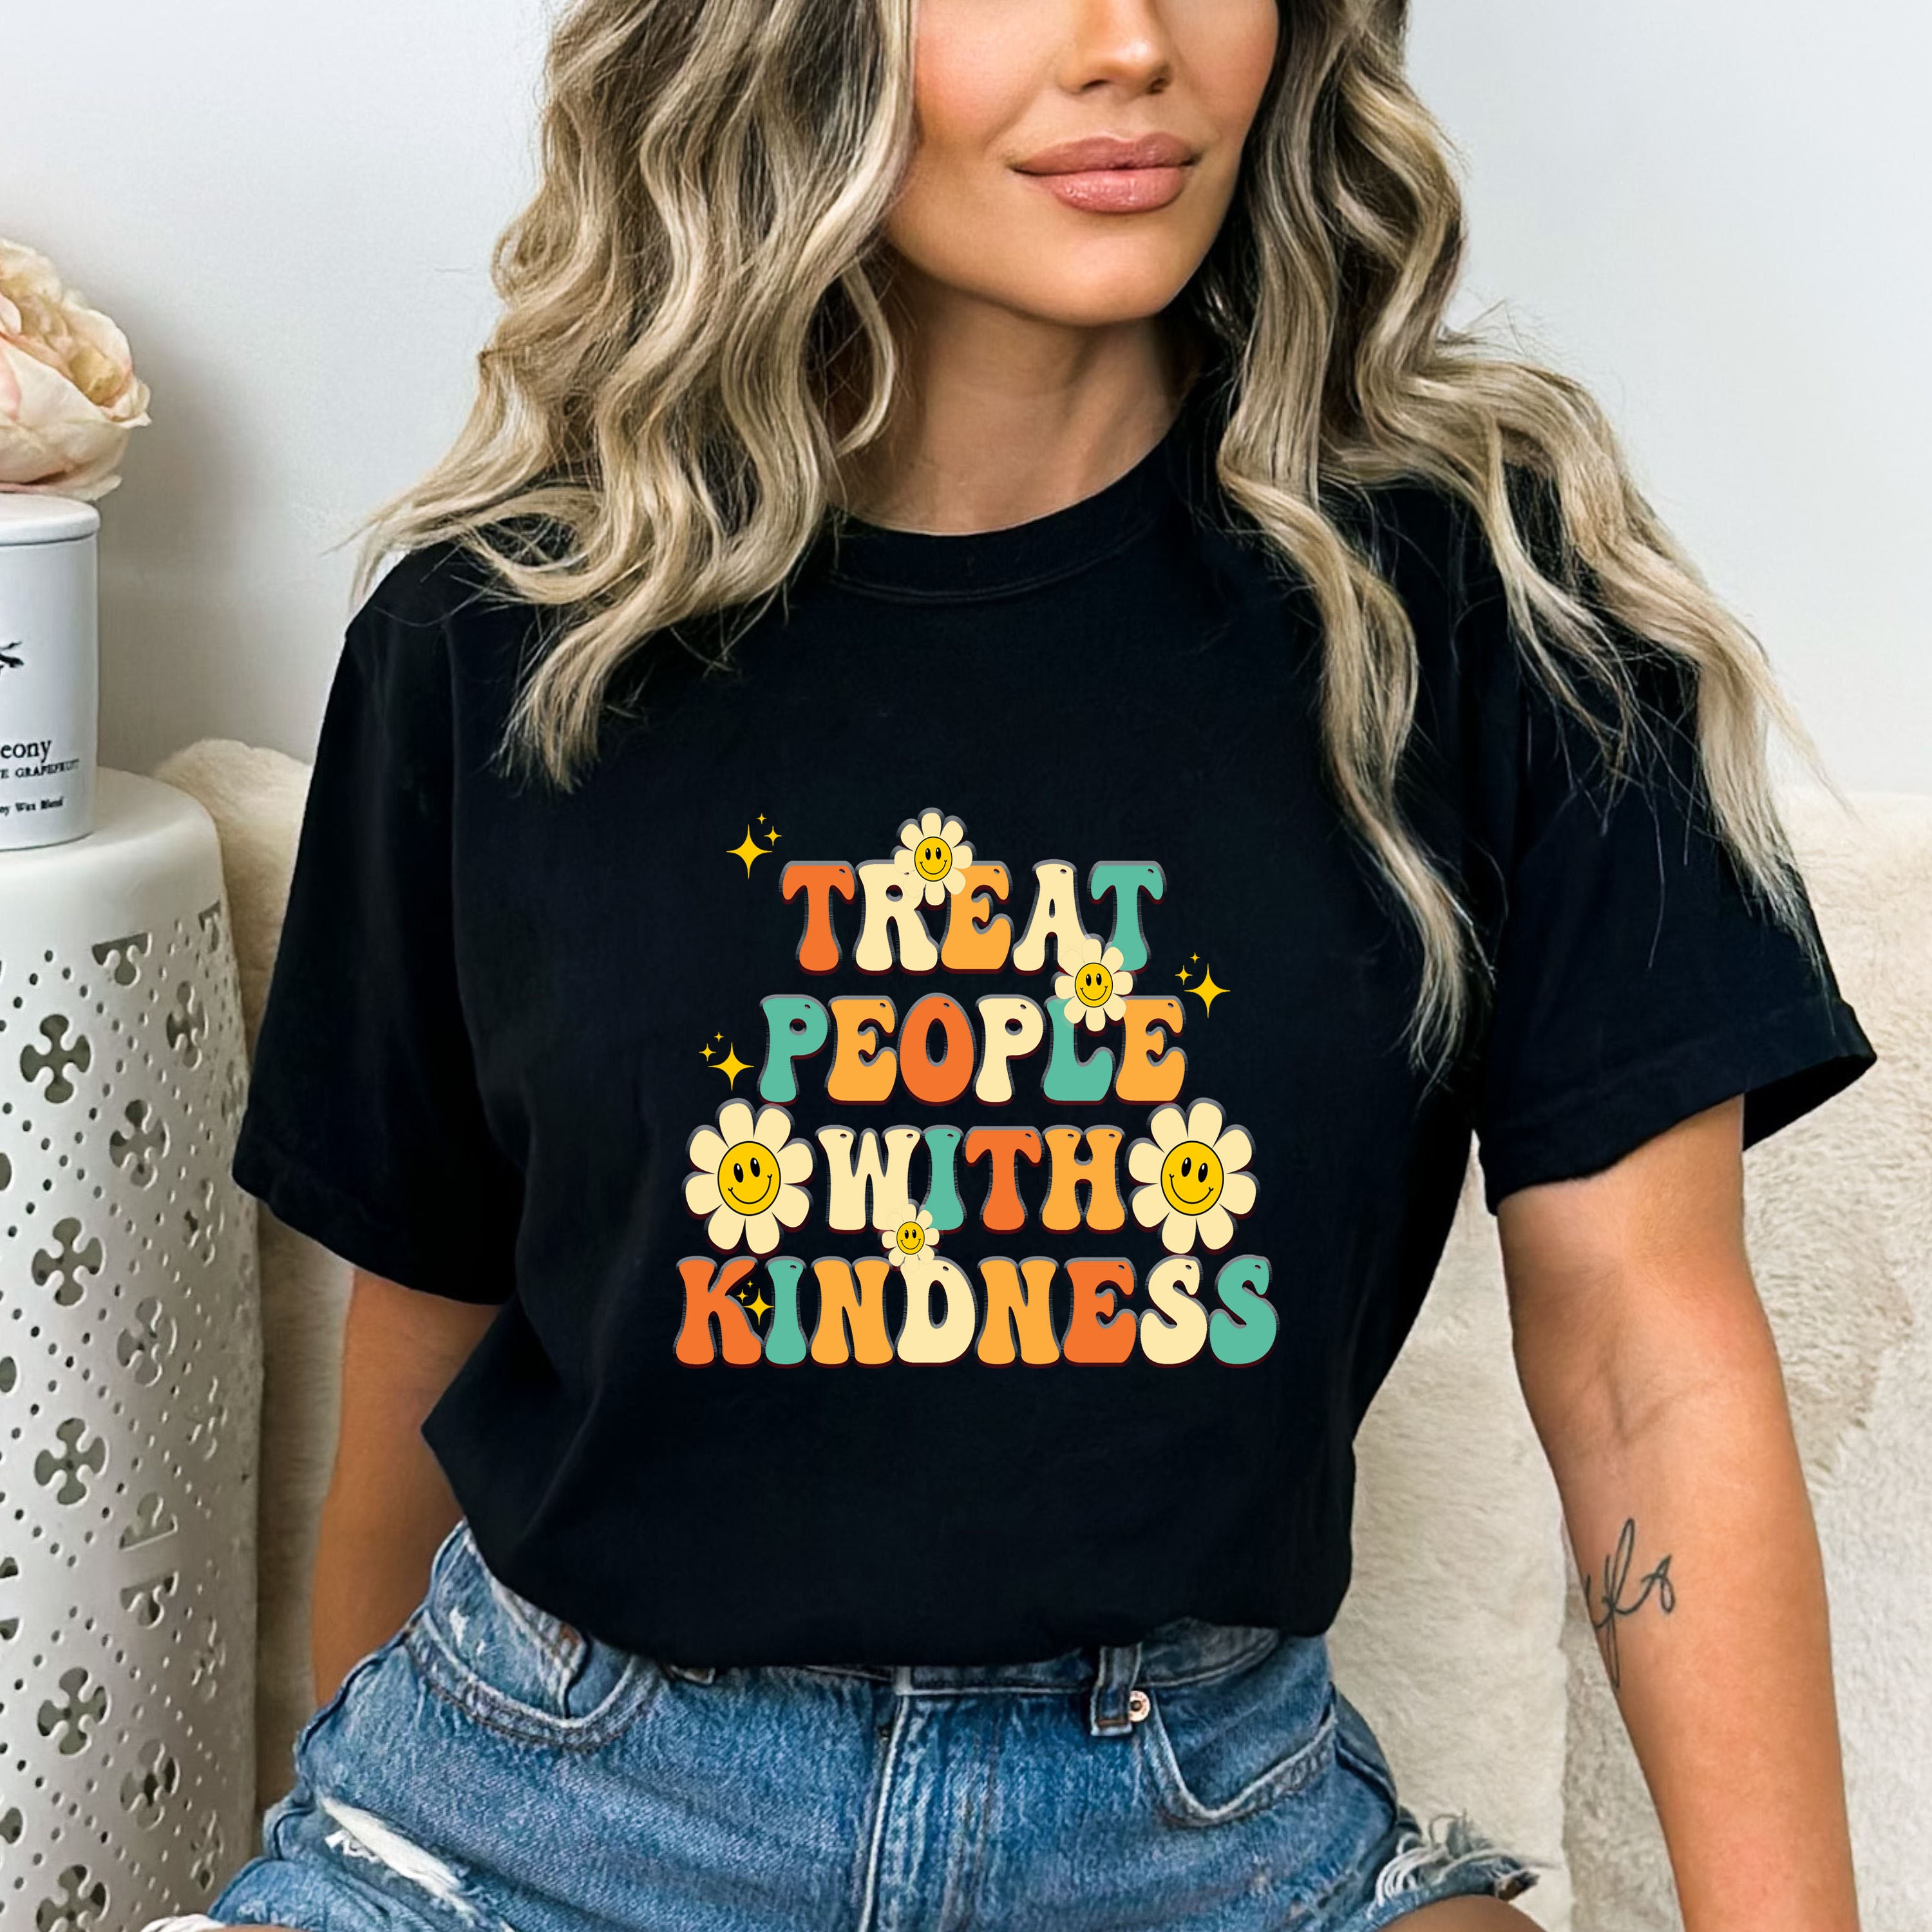 Treat People With Kindness - Bella canvas